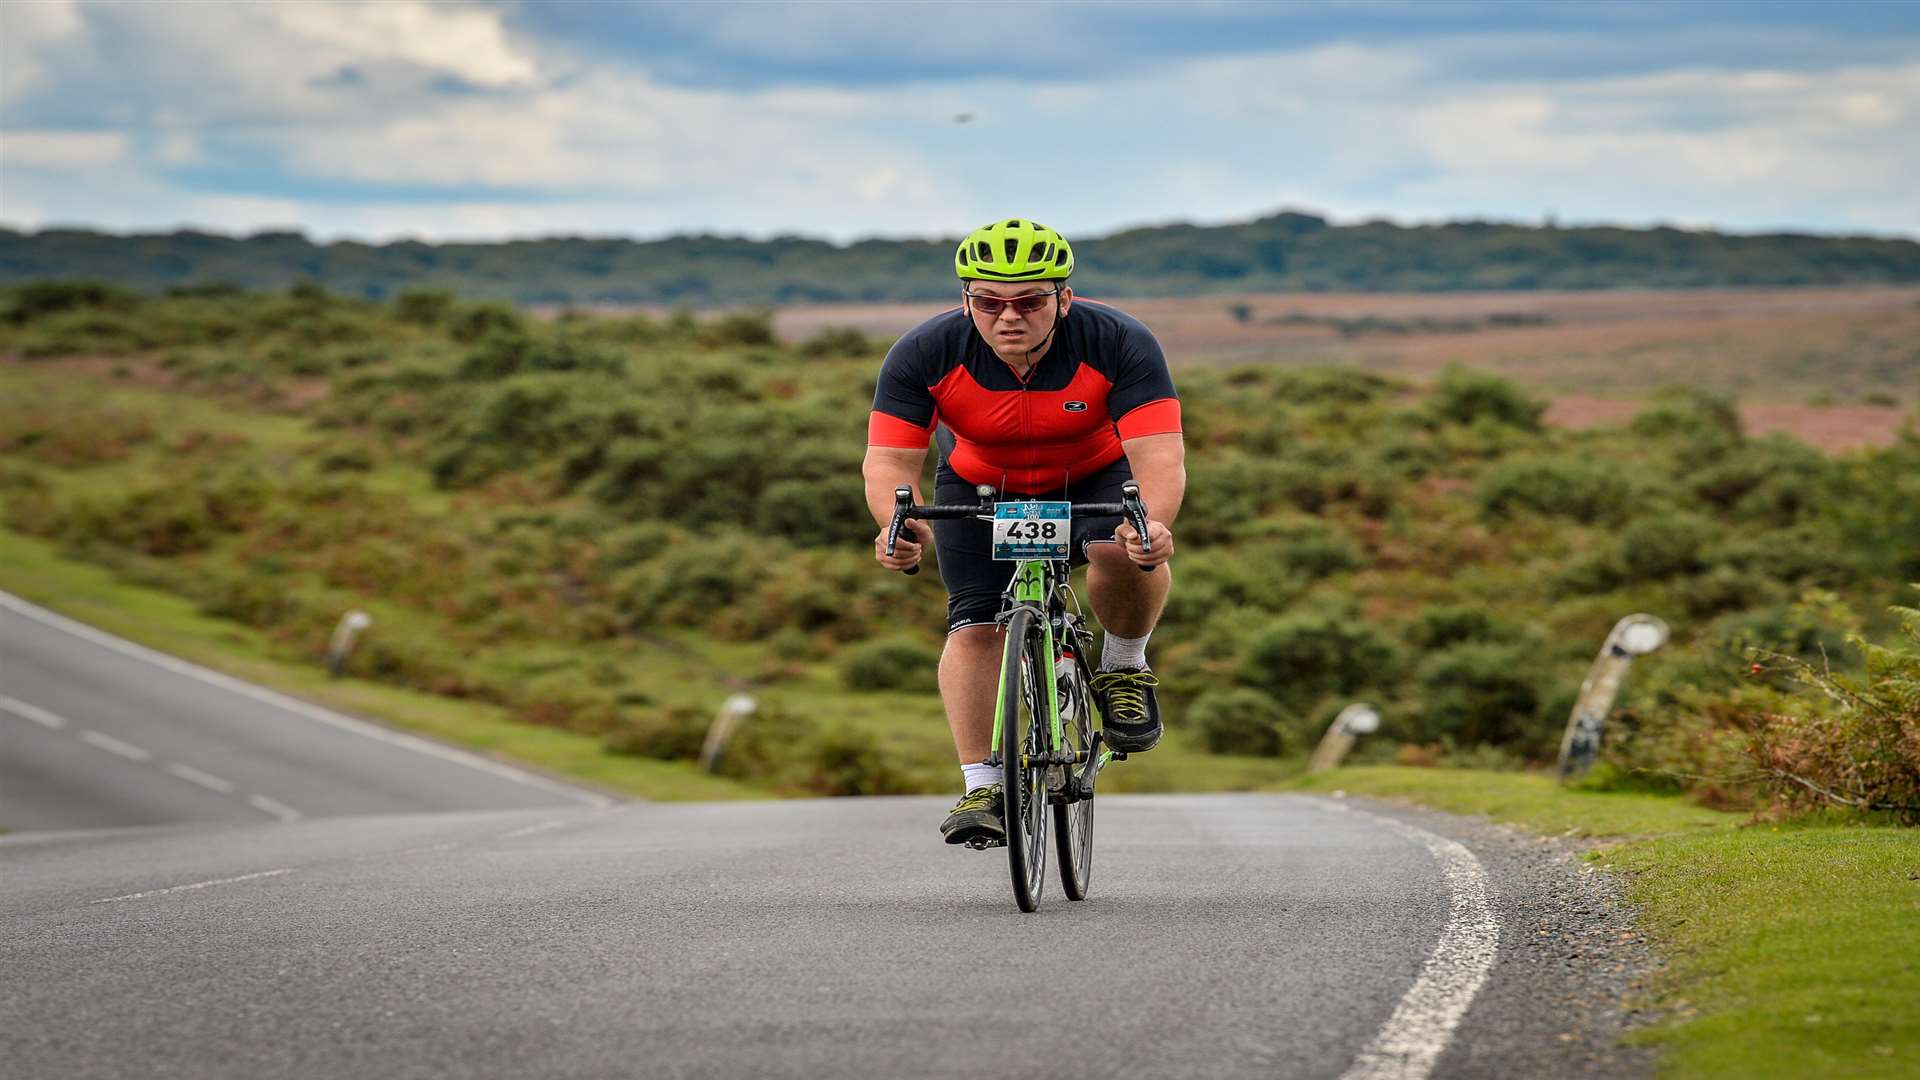 Nathan Cook is preparing to cycle from Land's End to John o' Groats next year